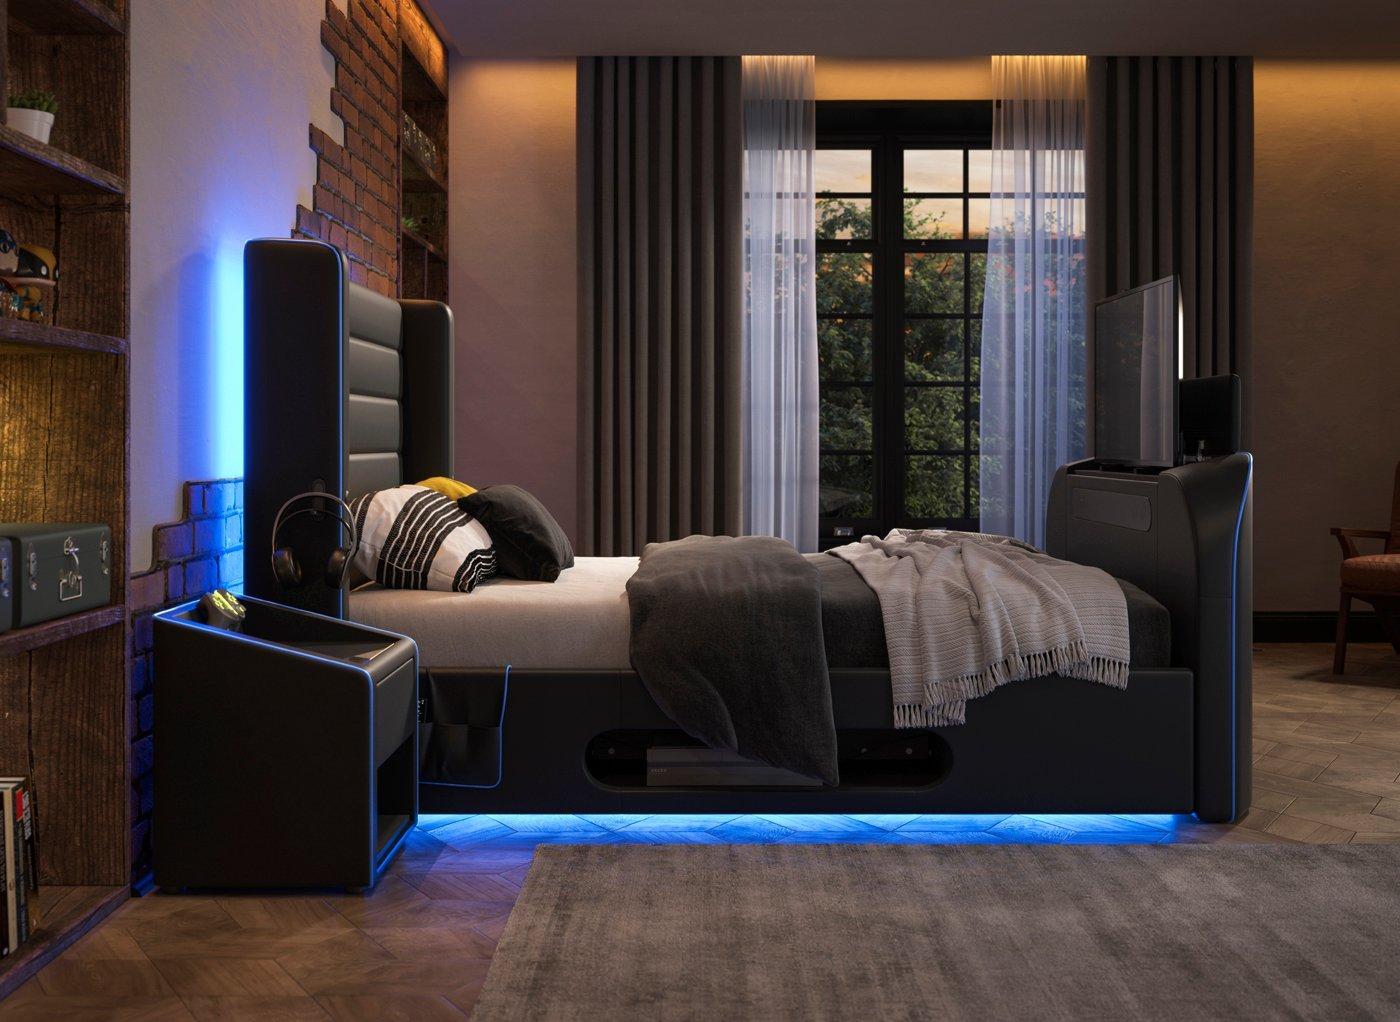 21 Savage, a popular rapper has a one-off gaming bed that costs